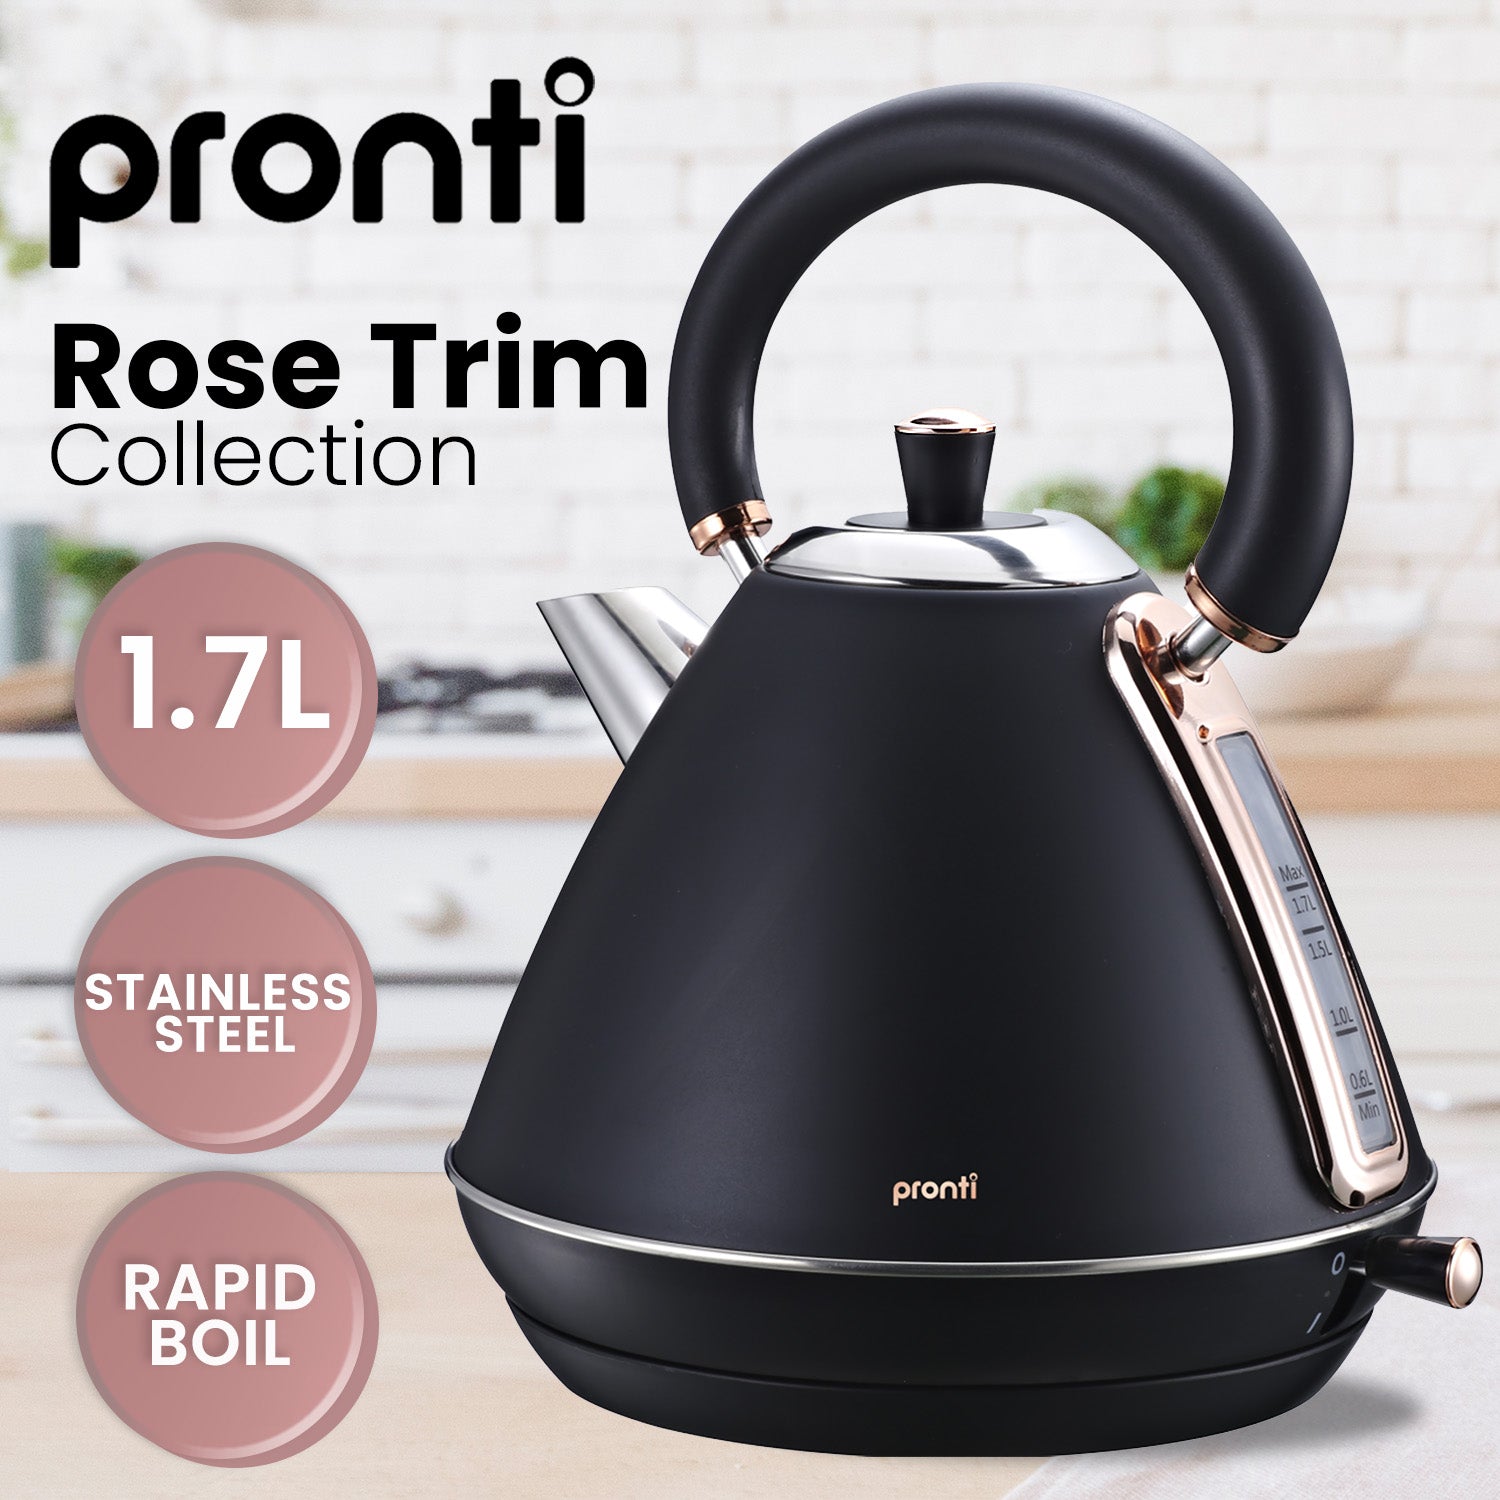 Pronti 1.7L Rose Trim Collection Kettle - Black - SILBERSHELL